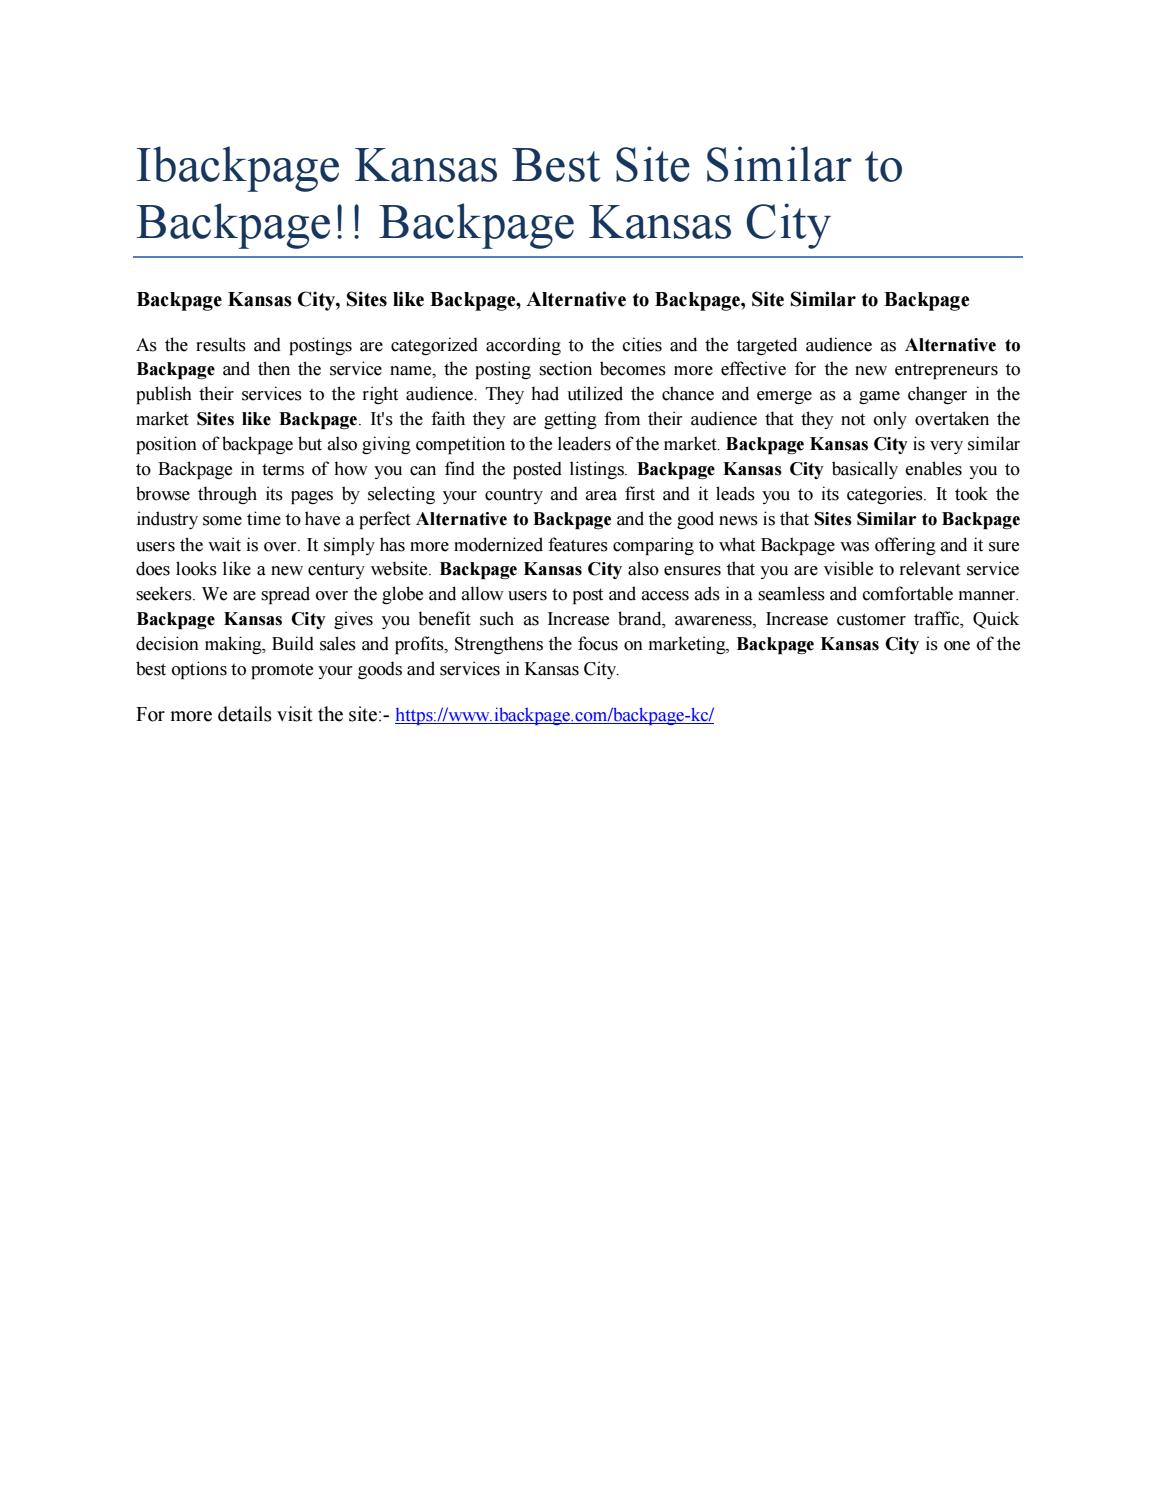 akshatha nayak recommends kansas city backpage classifieds pic